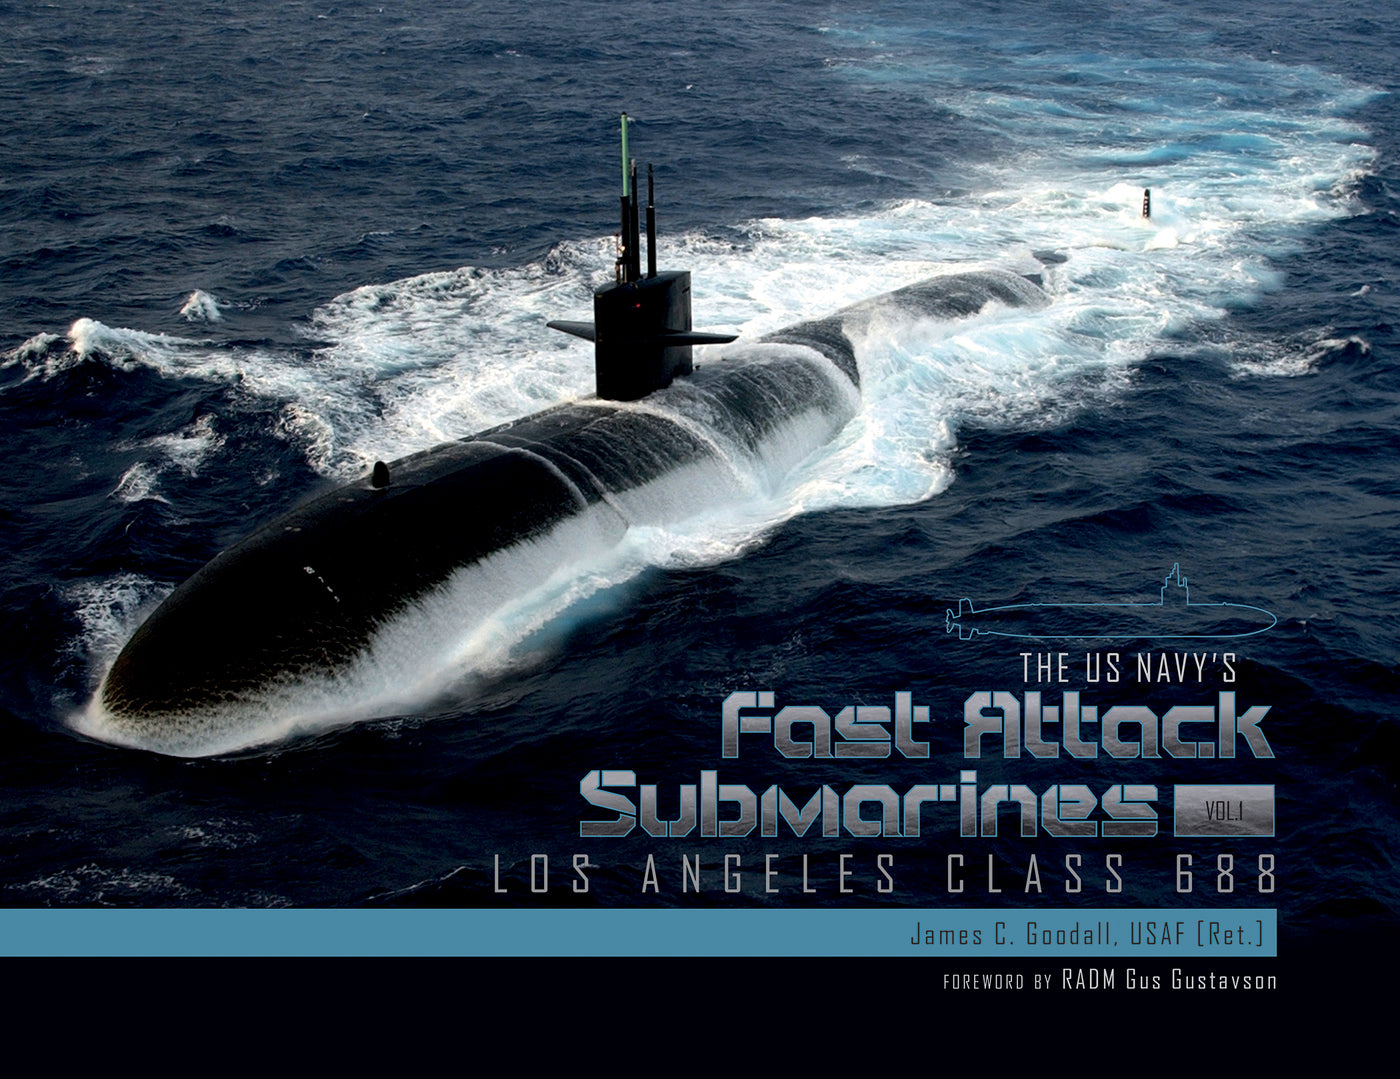 The US Navy's Fast Attack Submarines, Vol.1